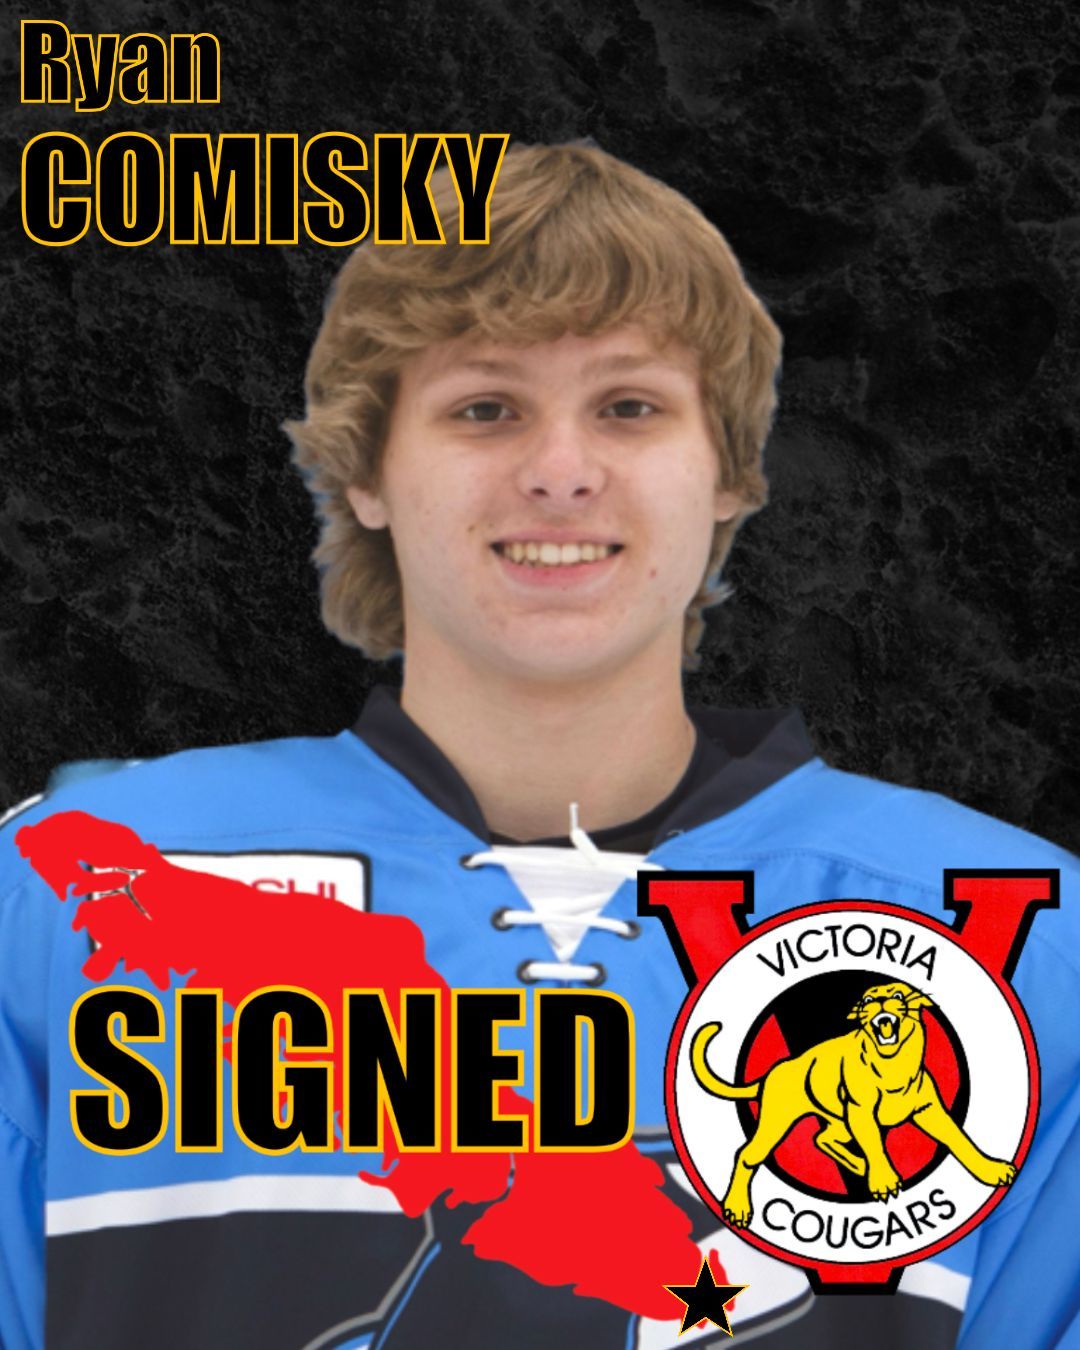 SIGNED! The Cougars have signed ‘04 Forward Ryan COMISKY out of PCHA U18! Welcome to the club!